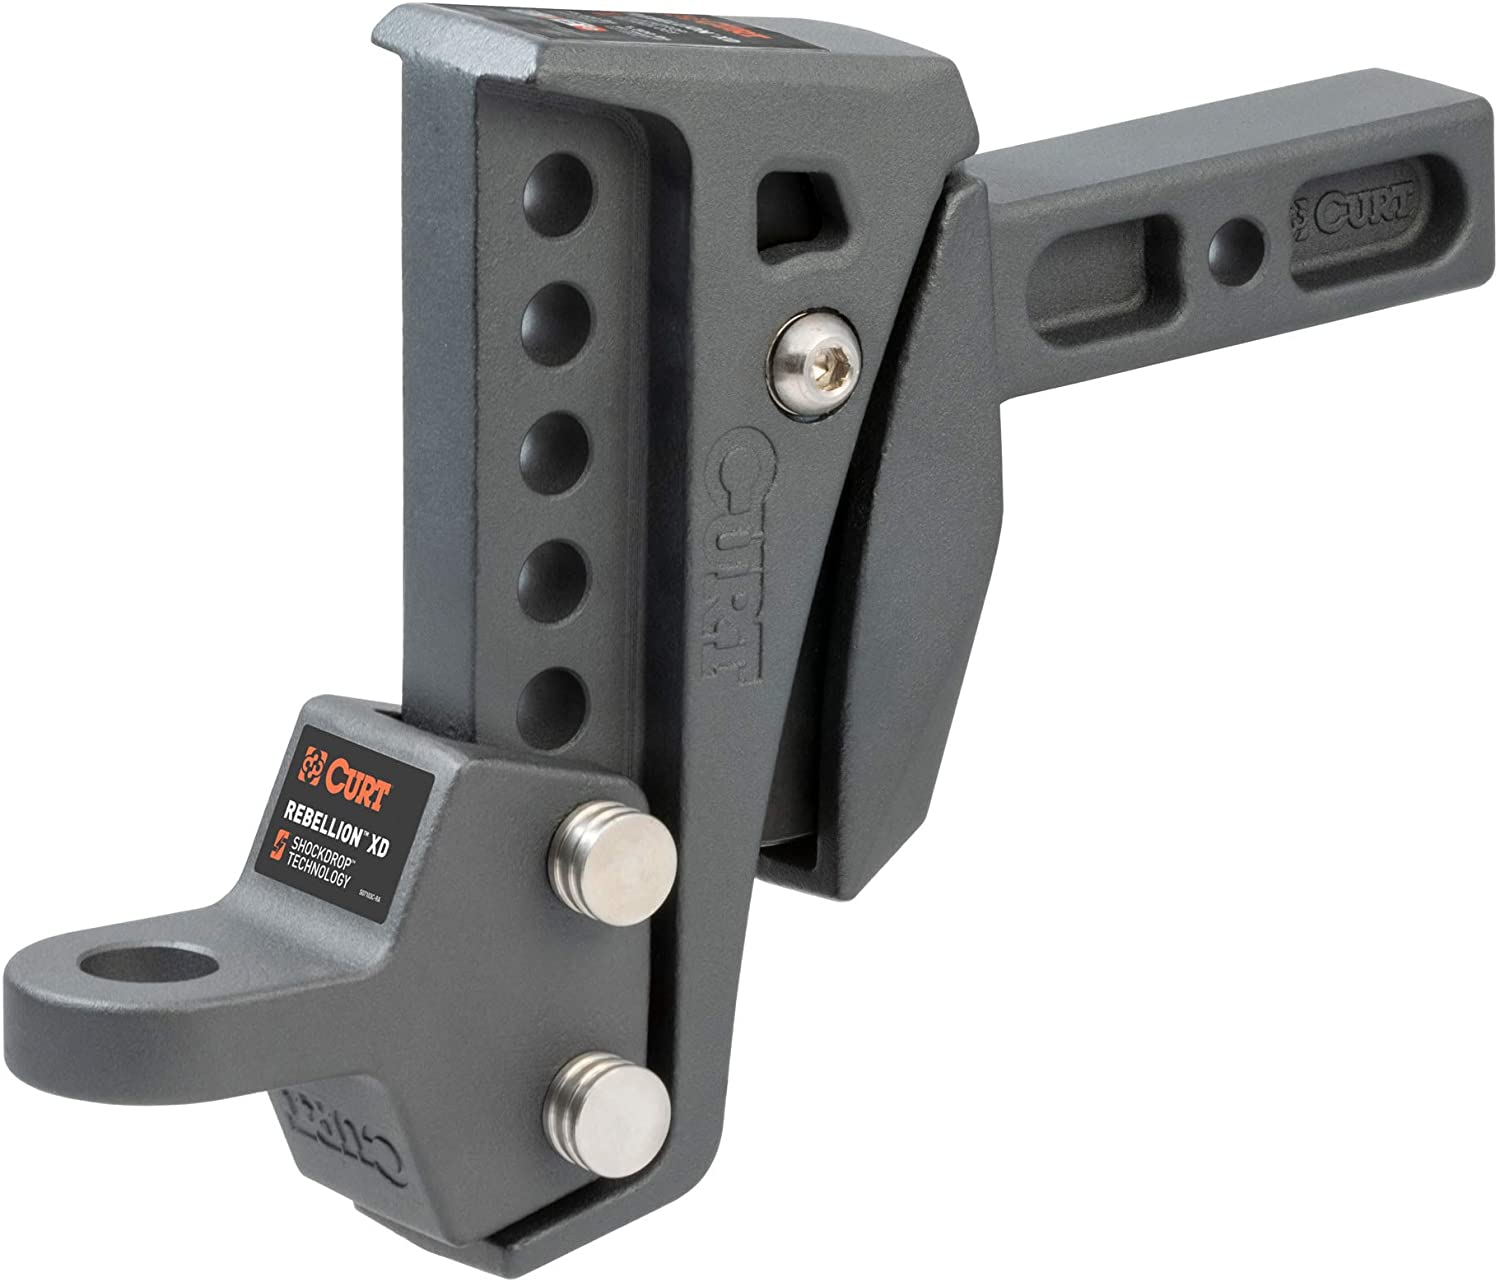 CURT 45949 Rebellion XD Adjustable Cushion Hitch Ball Mount 2-Inch Receiver, 15,000 lbs, 6-Inch Drop (2 Inch Receiver)